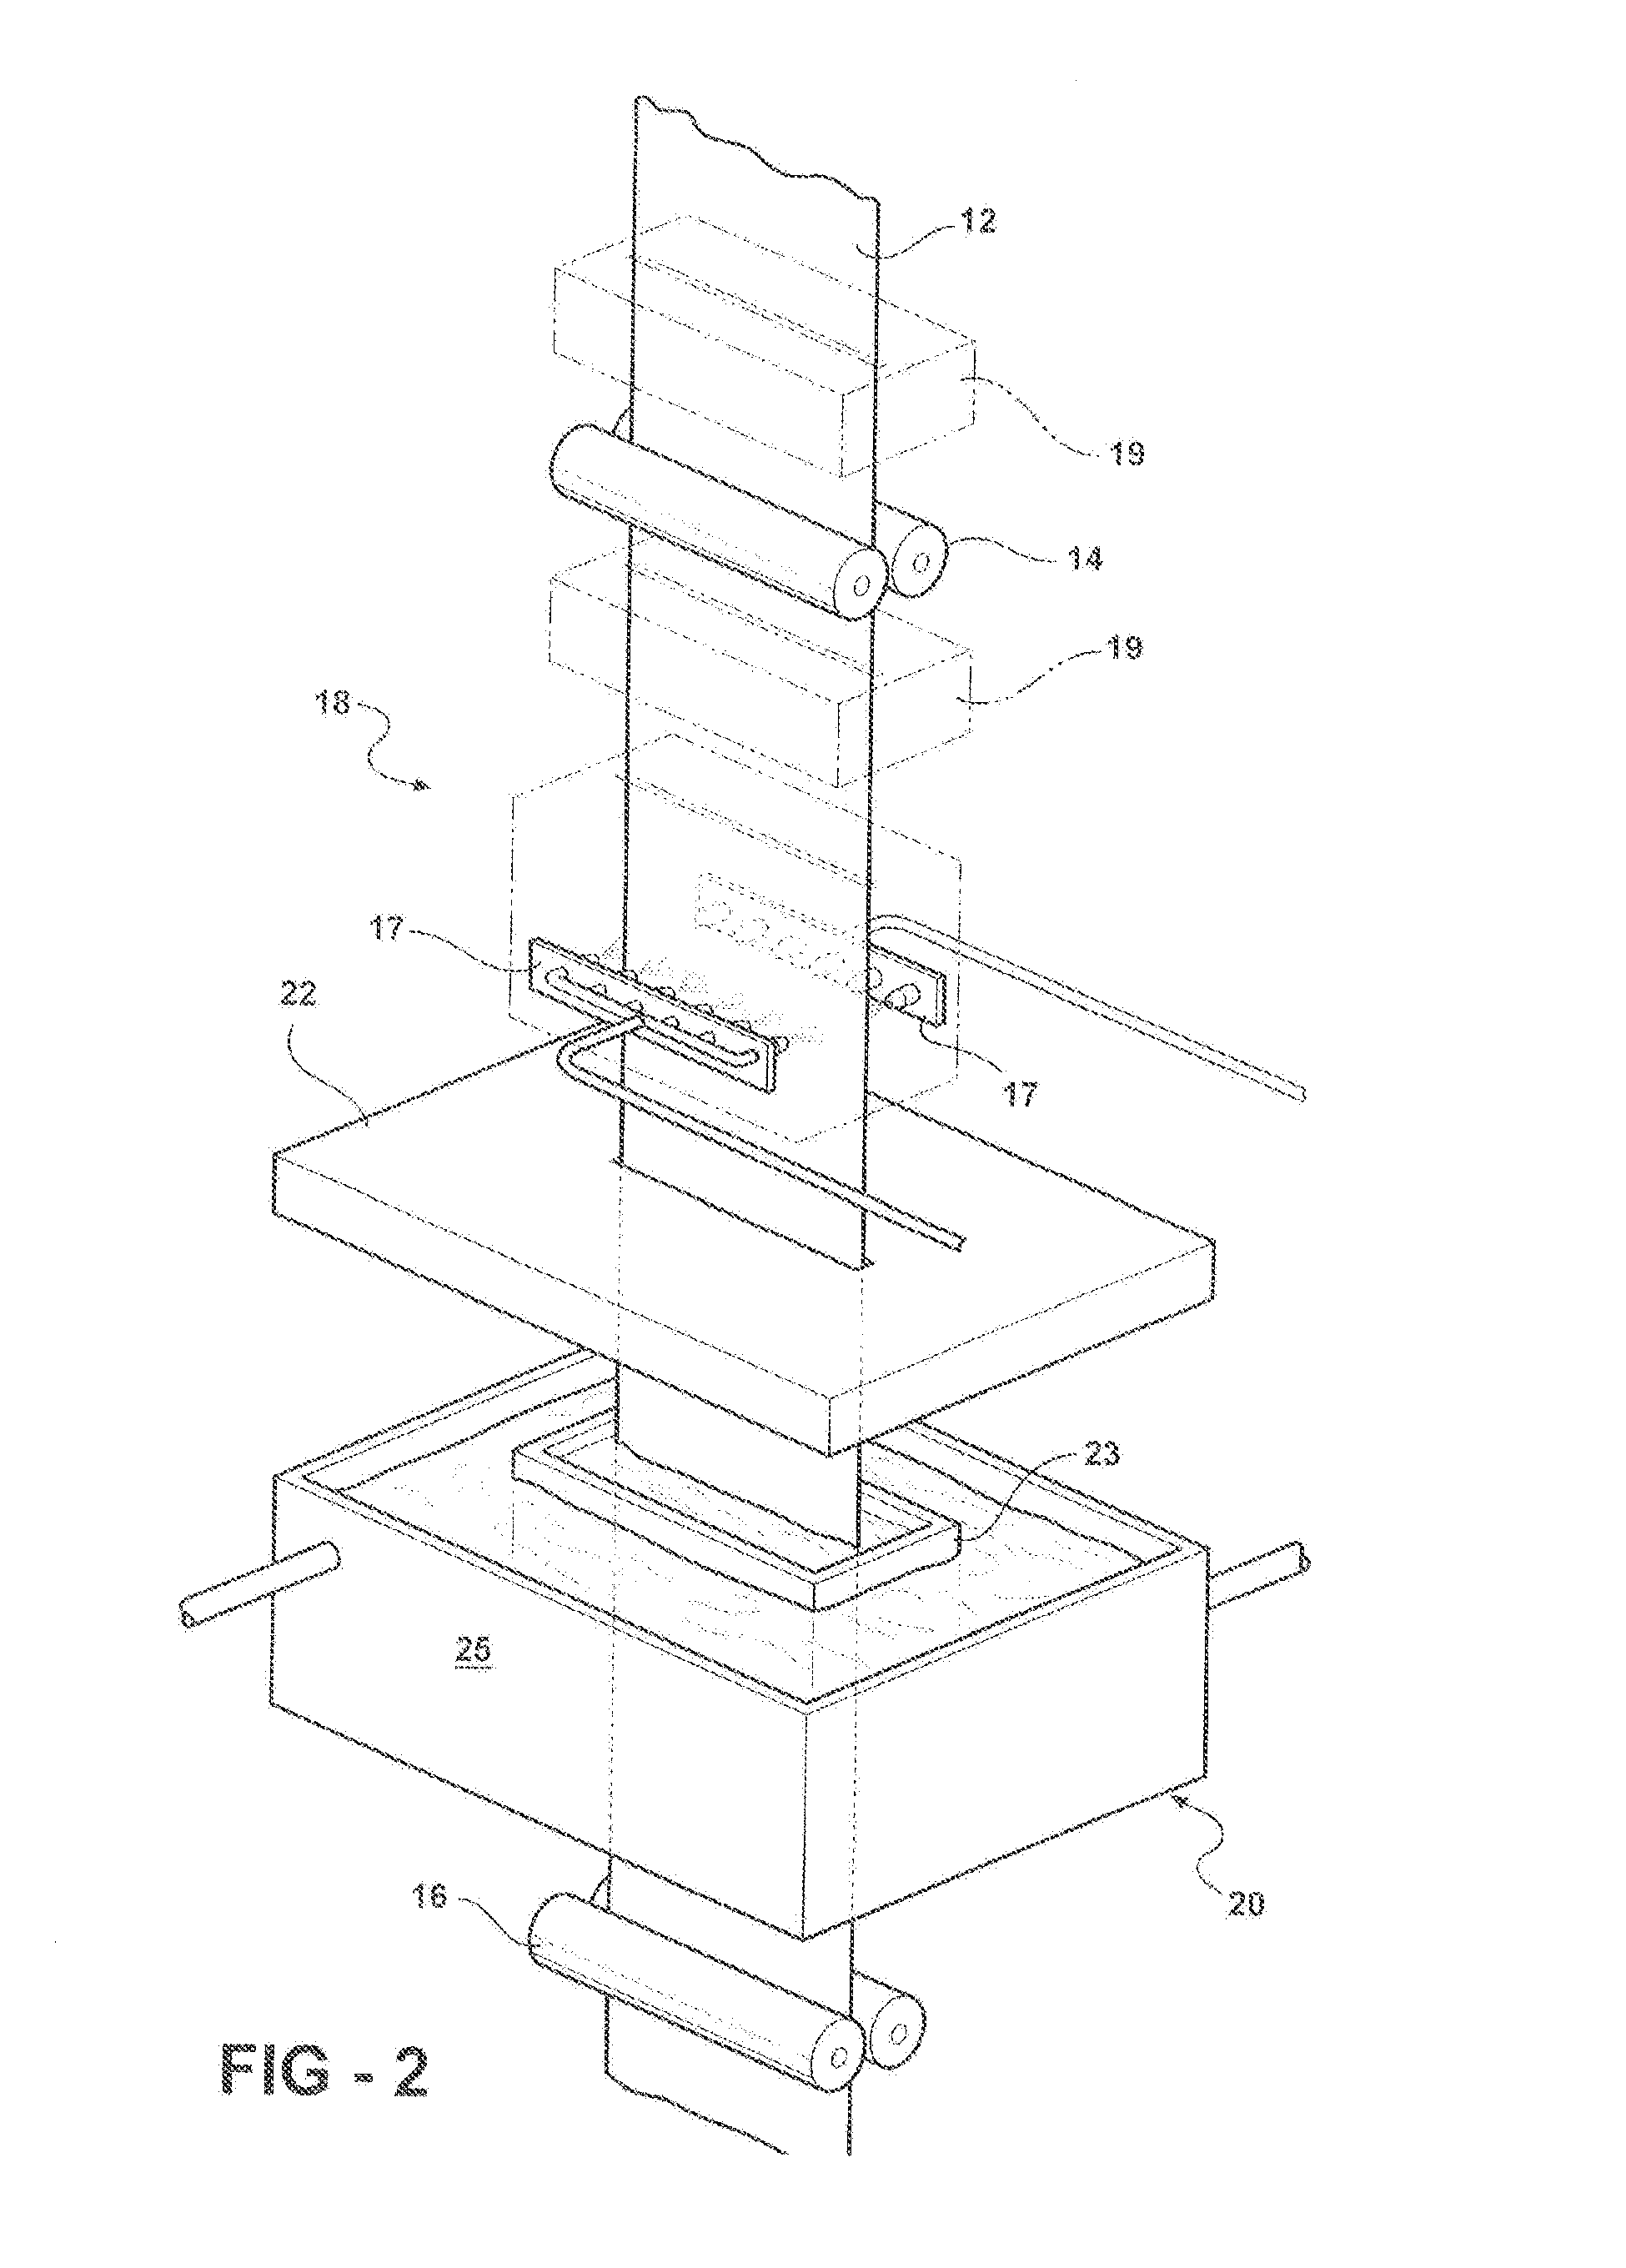 Method and apparatus for micro-treating iron-based alloy, and the material resulting therefrom